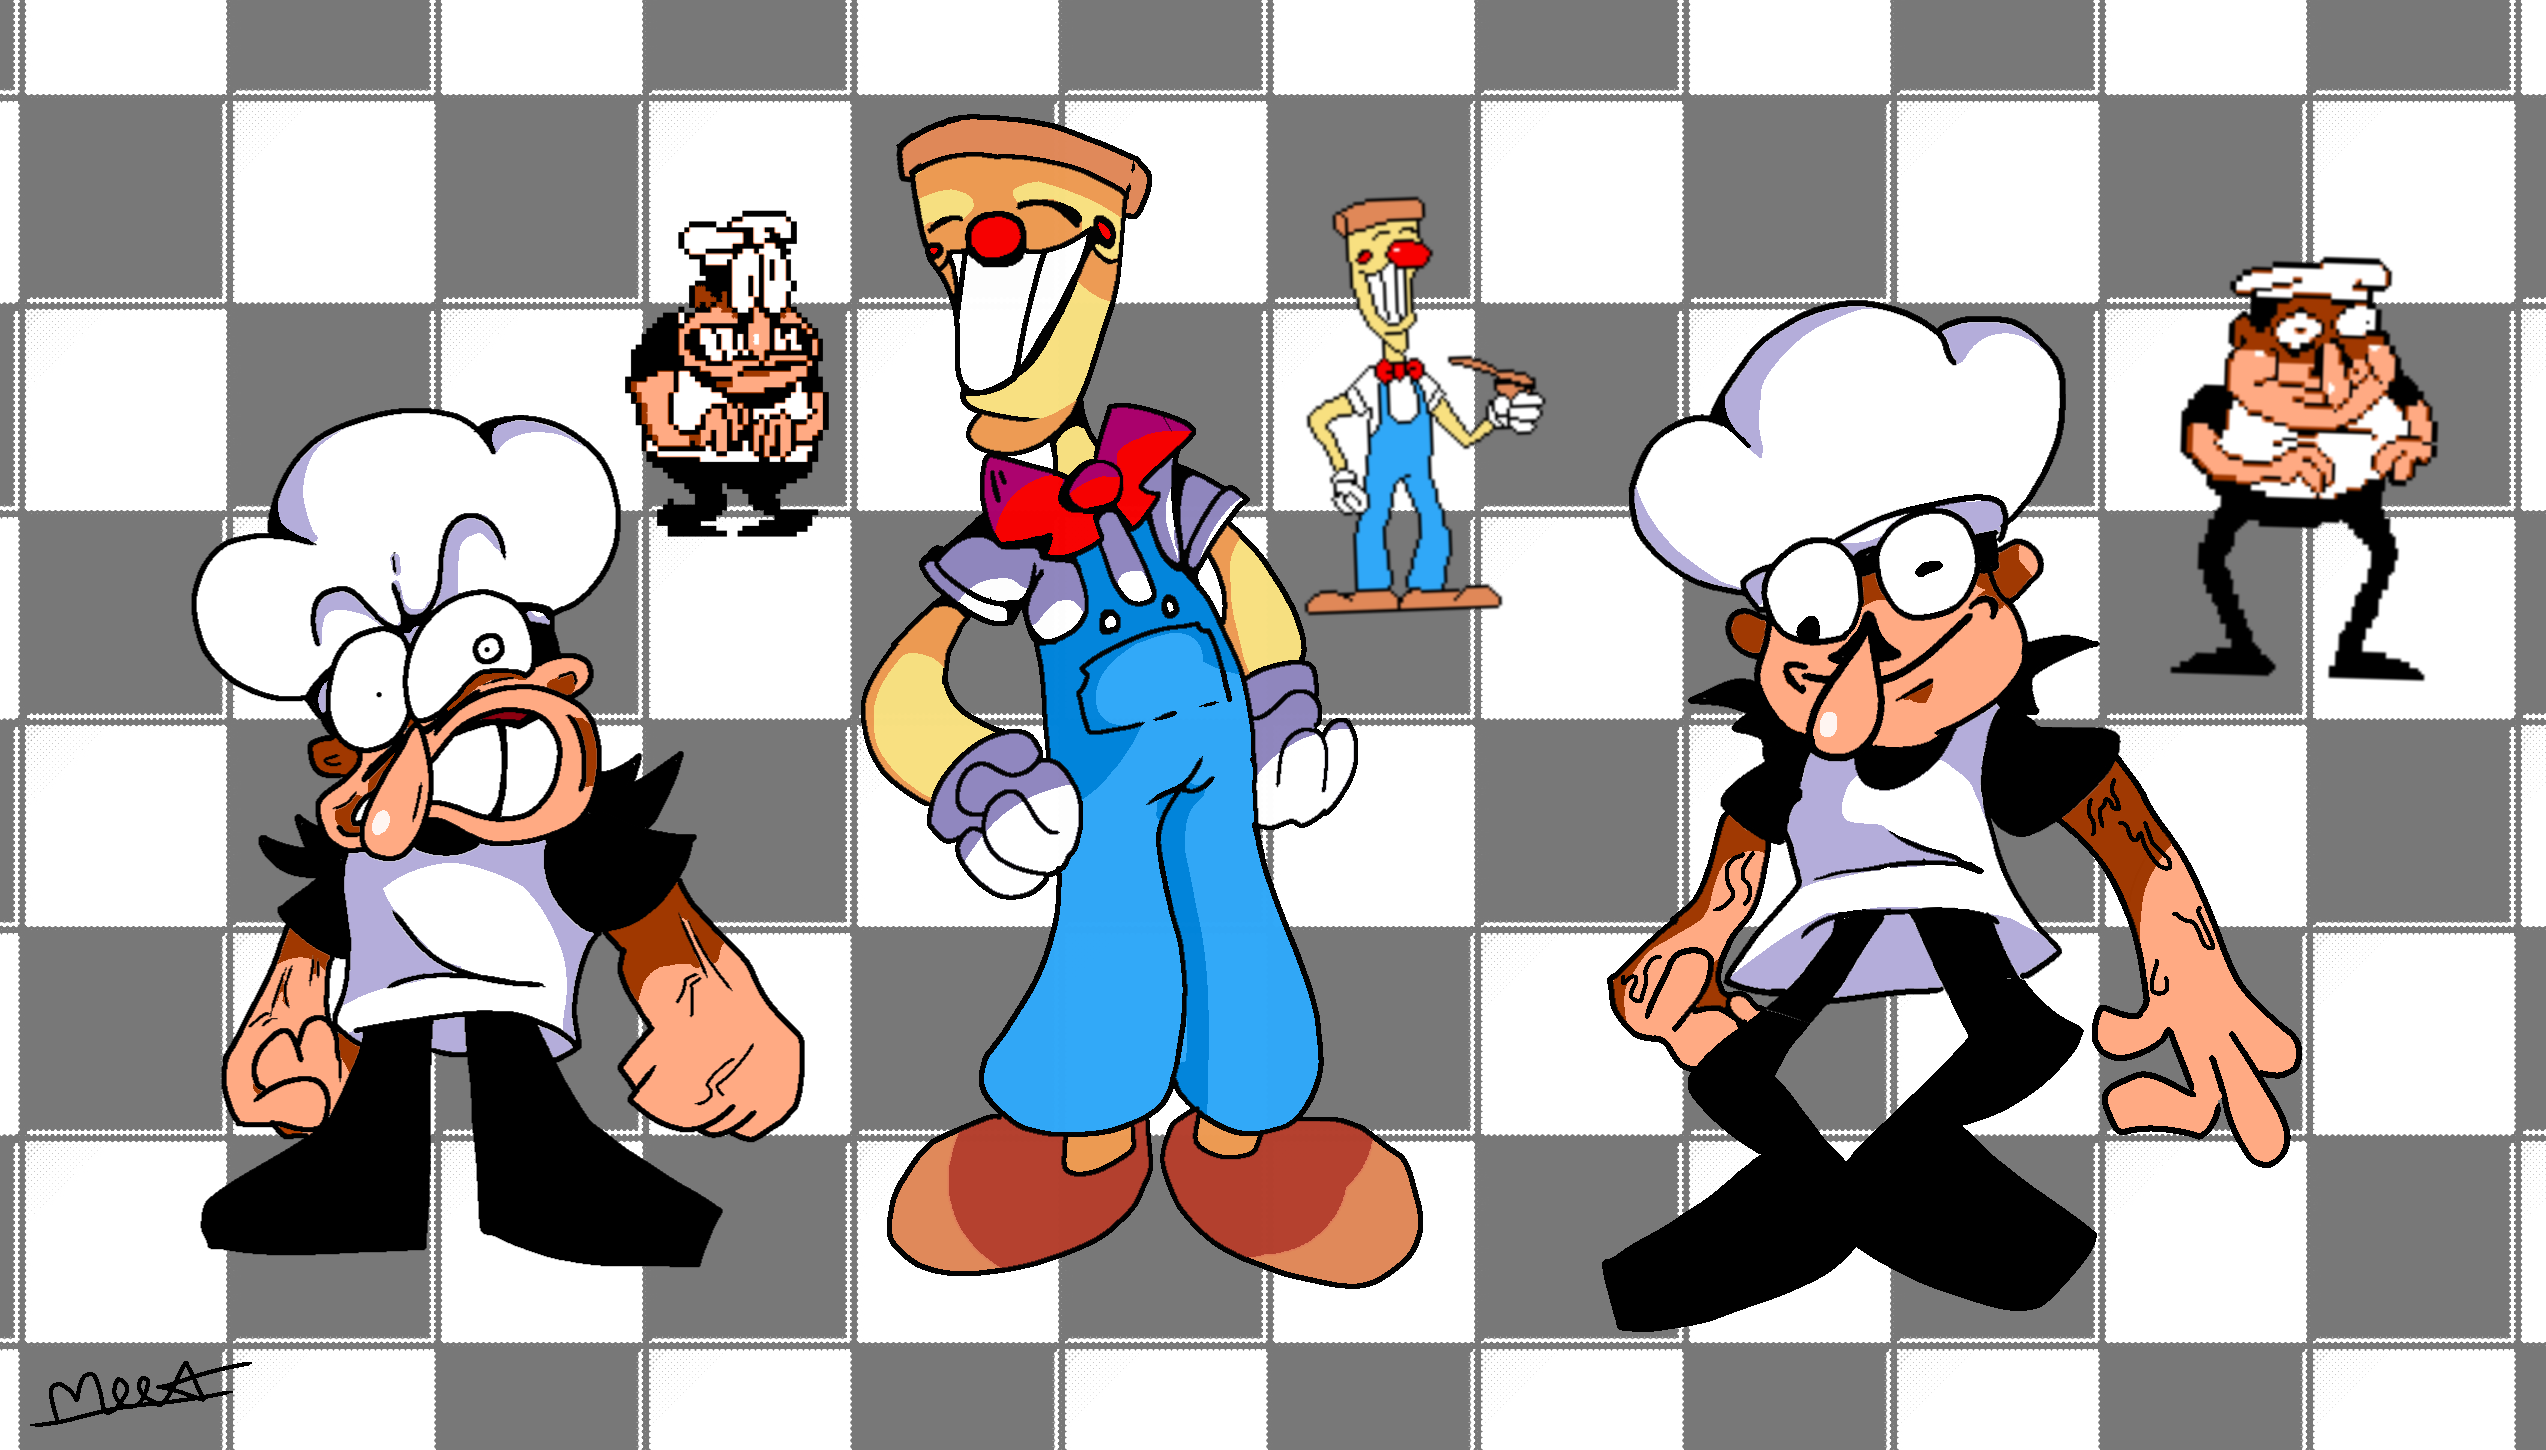 All pizza tower characters by johnnyboy131313 on DeviantArt